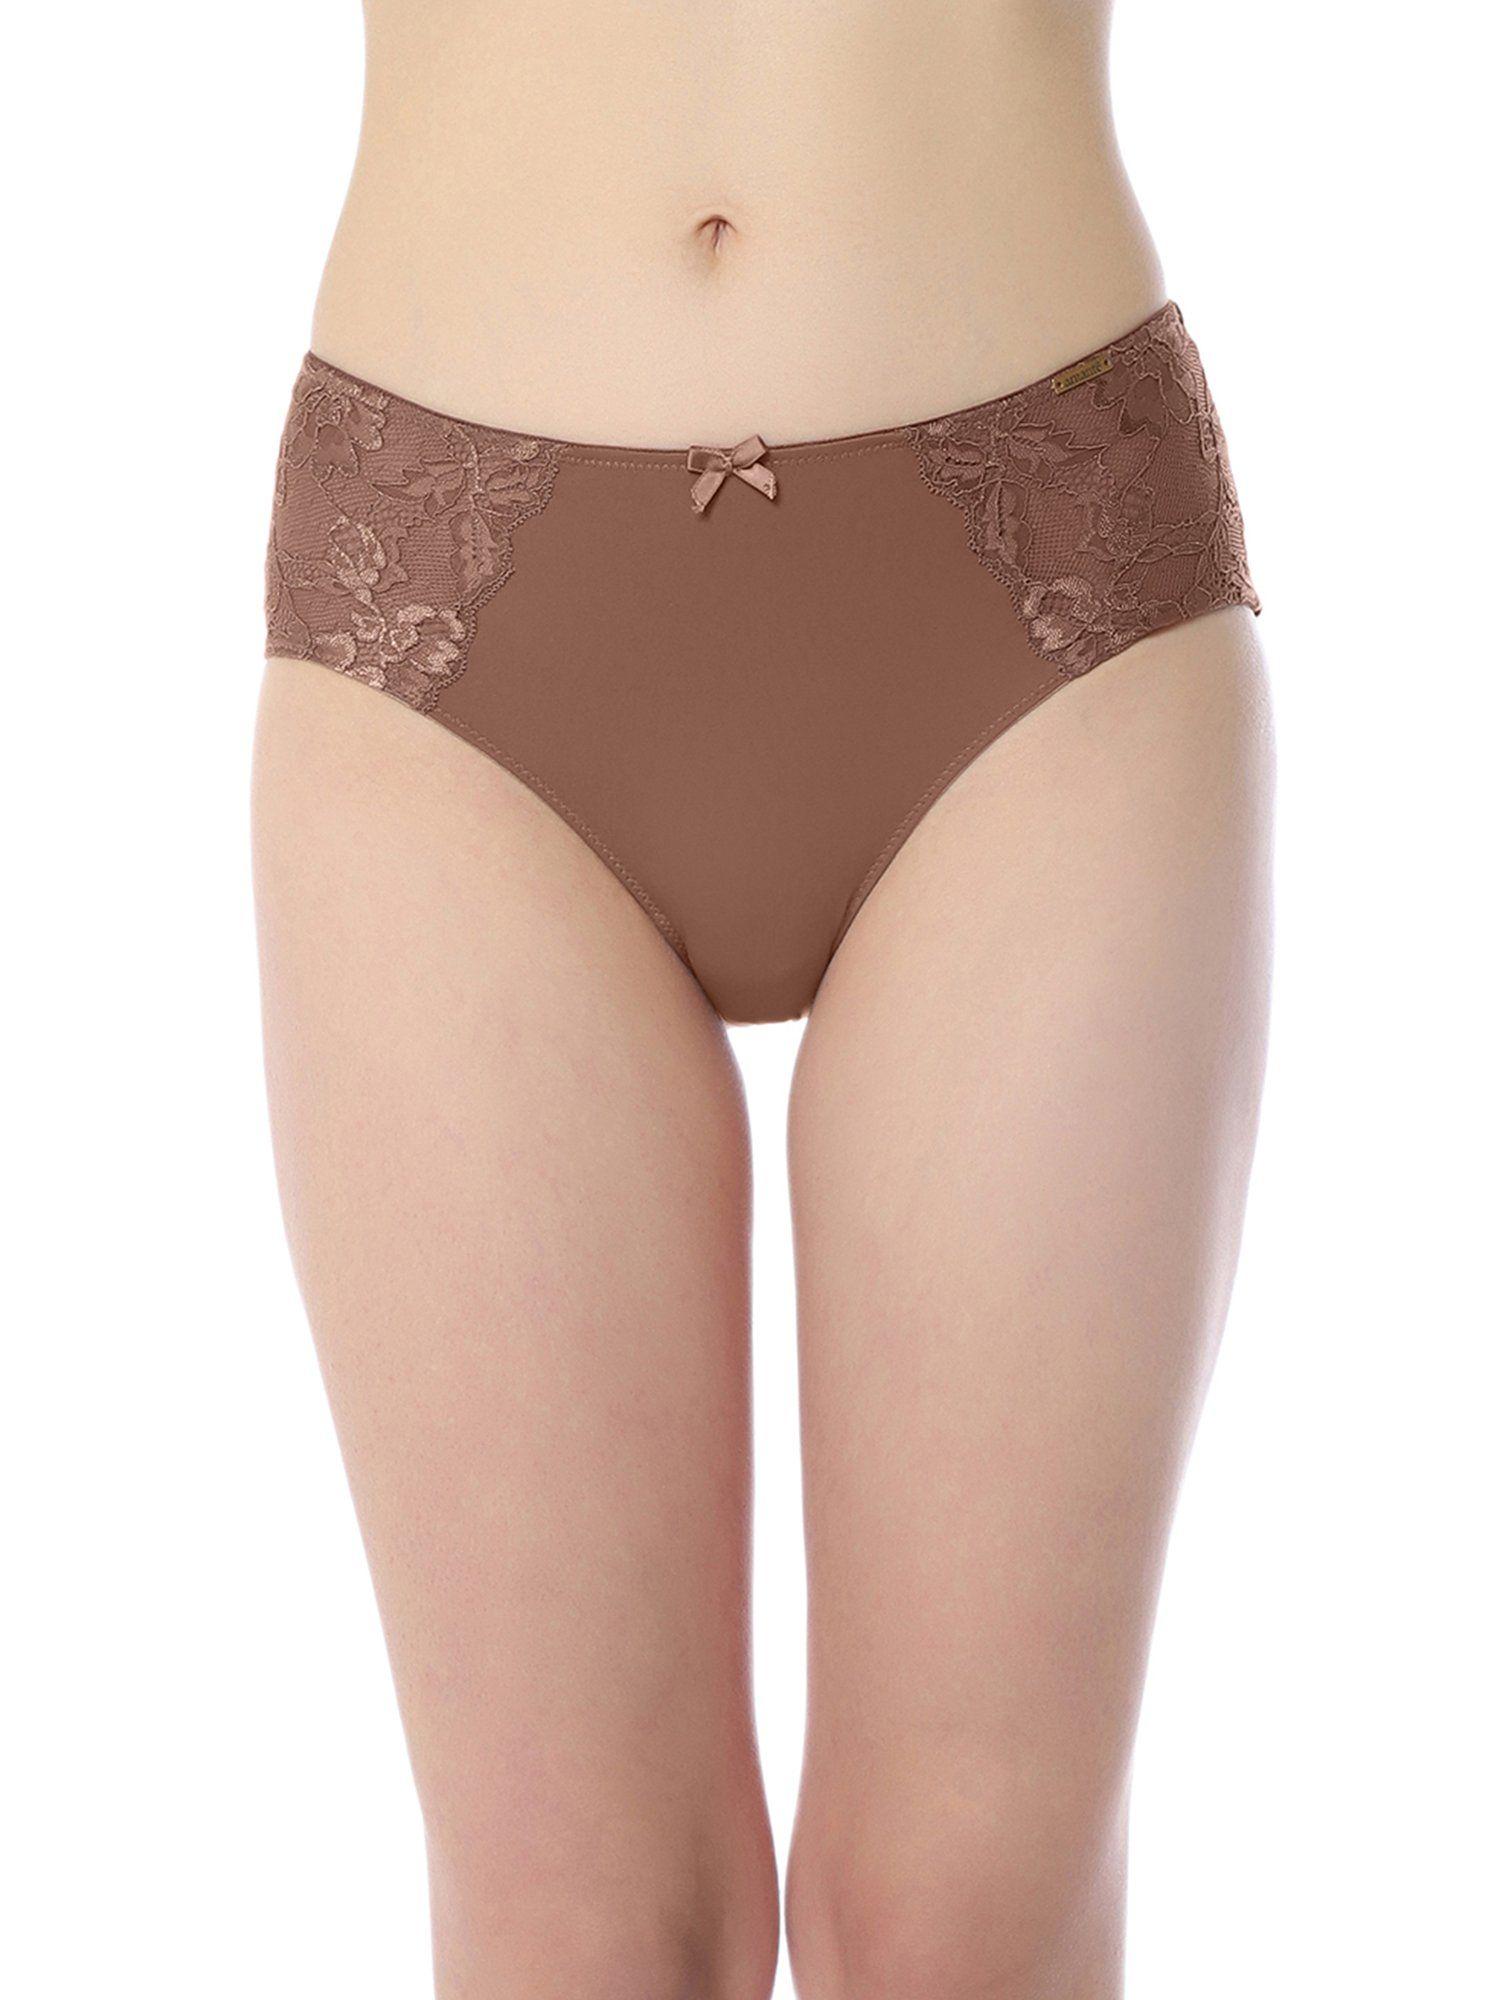 solid mid rise three-fourth coverage luxe support hipster panty- brown